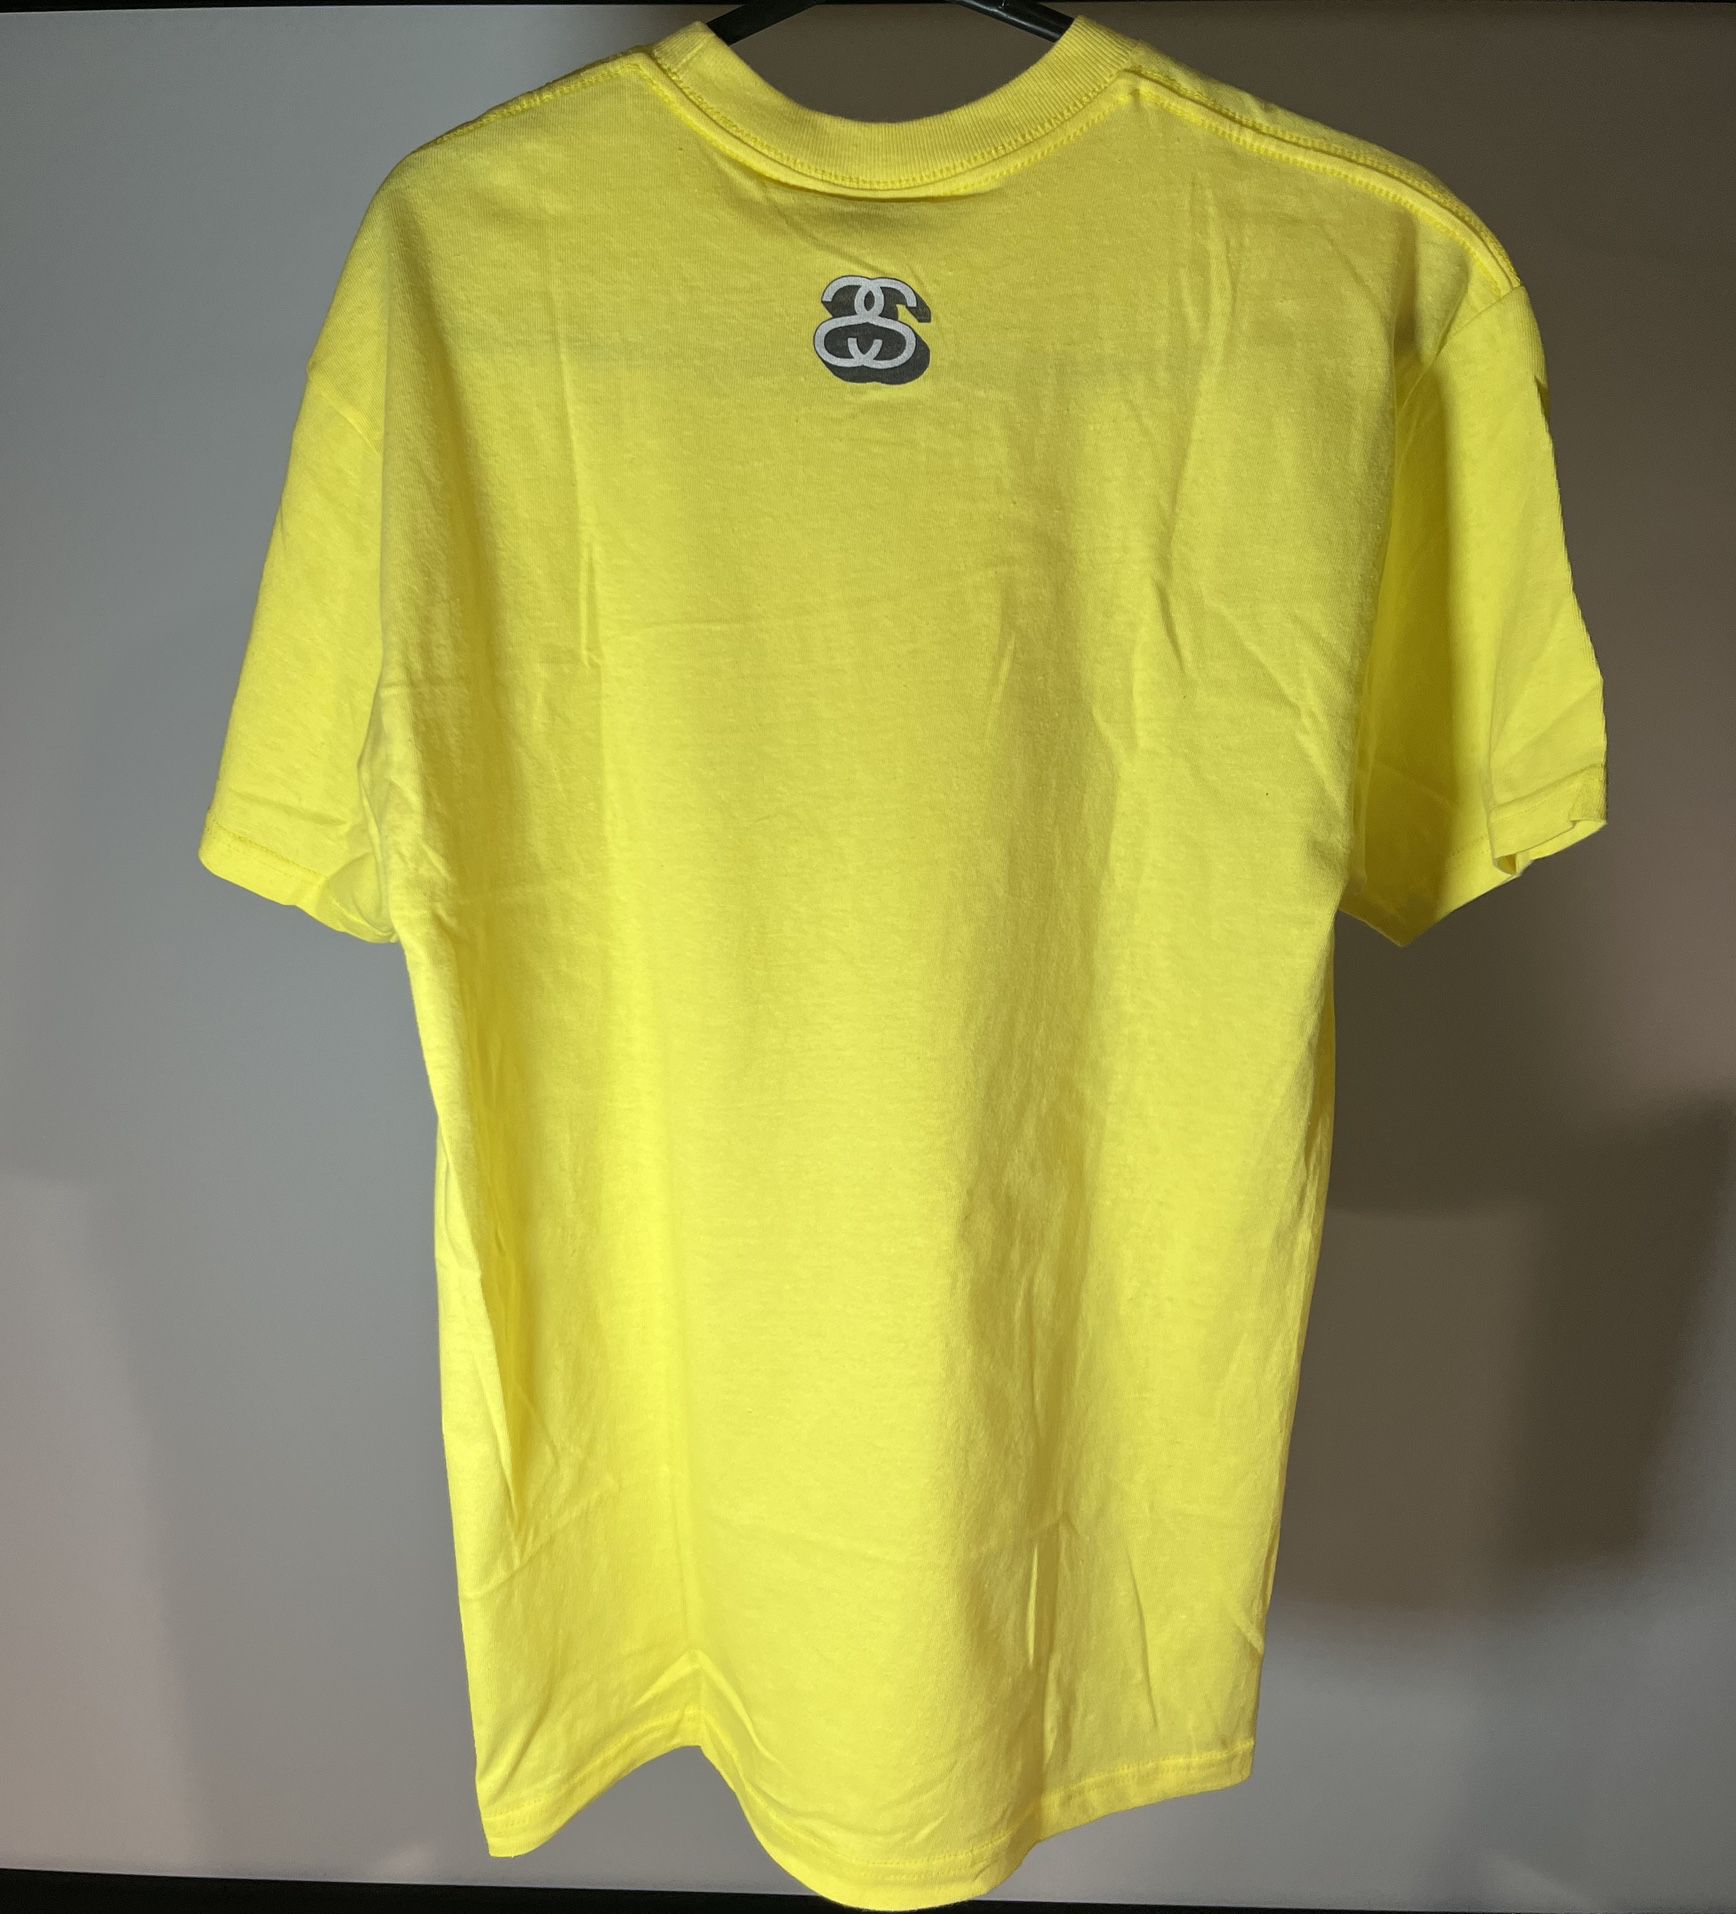 Stussy Cutout T Shirt Size Medium for Sale in Hewlett, NY - OfferUp